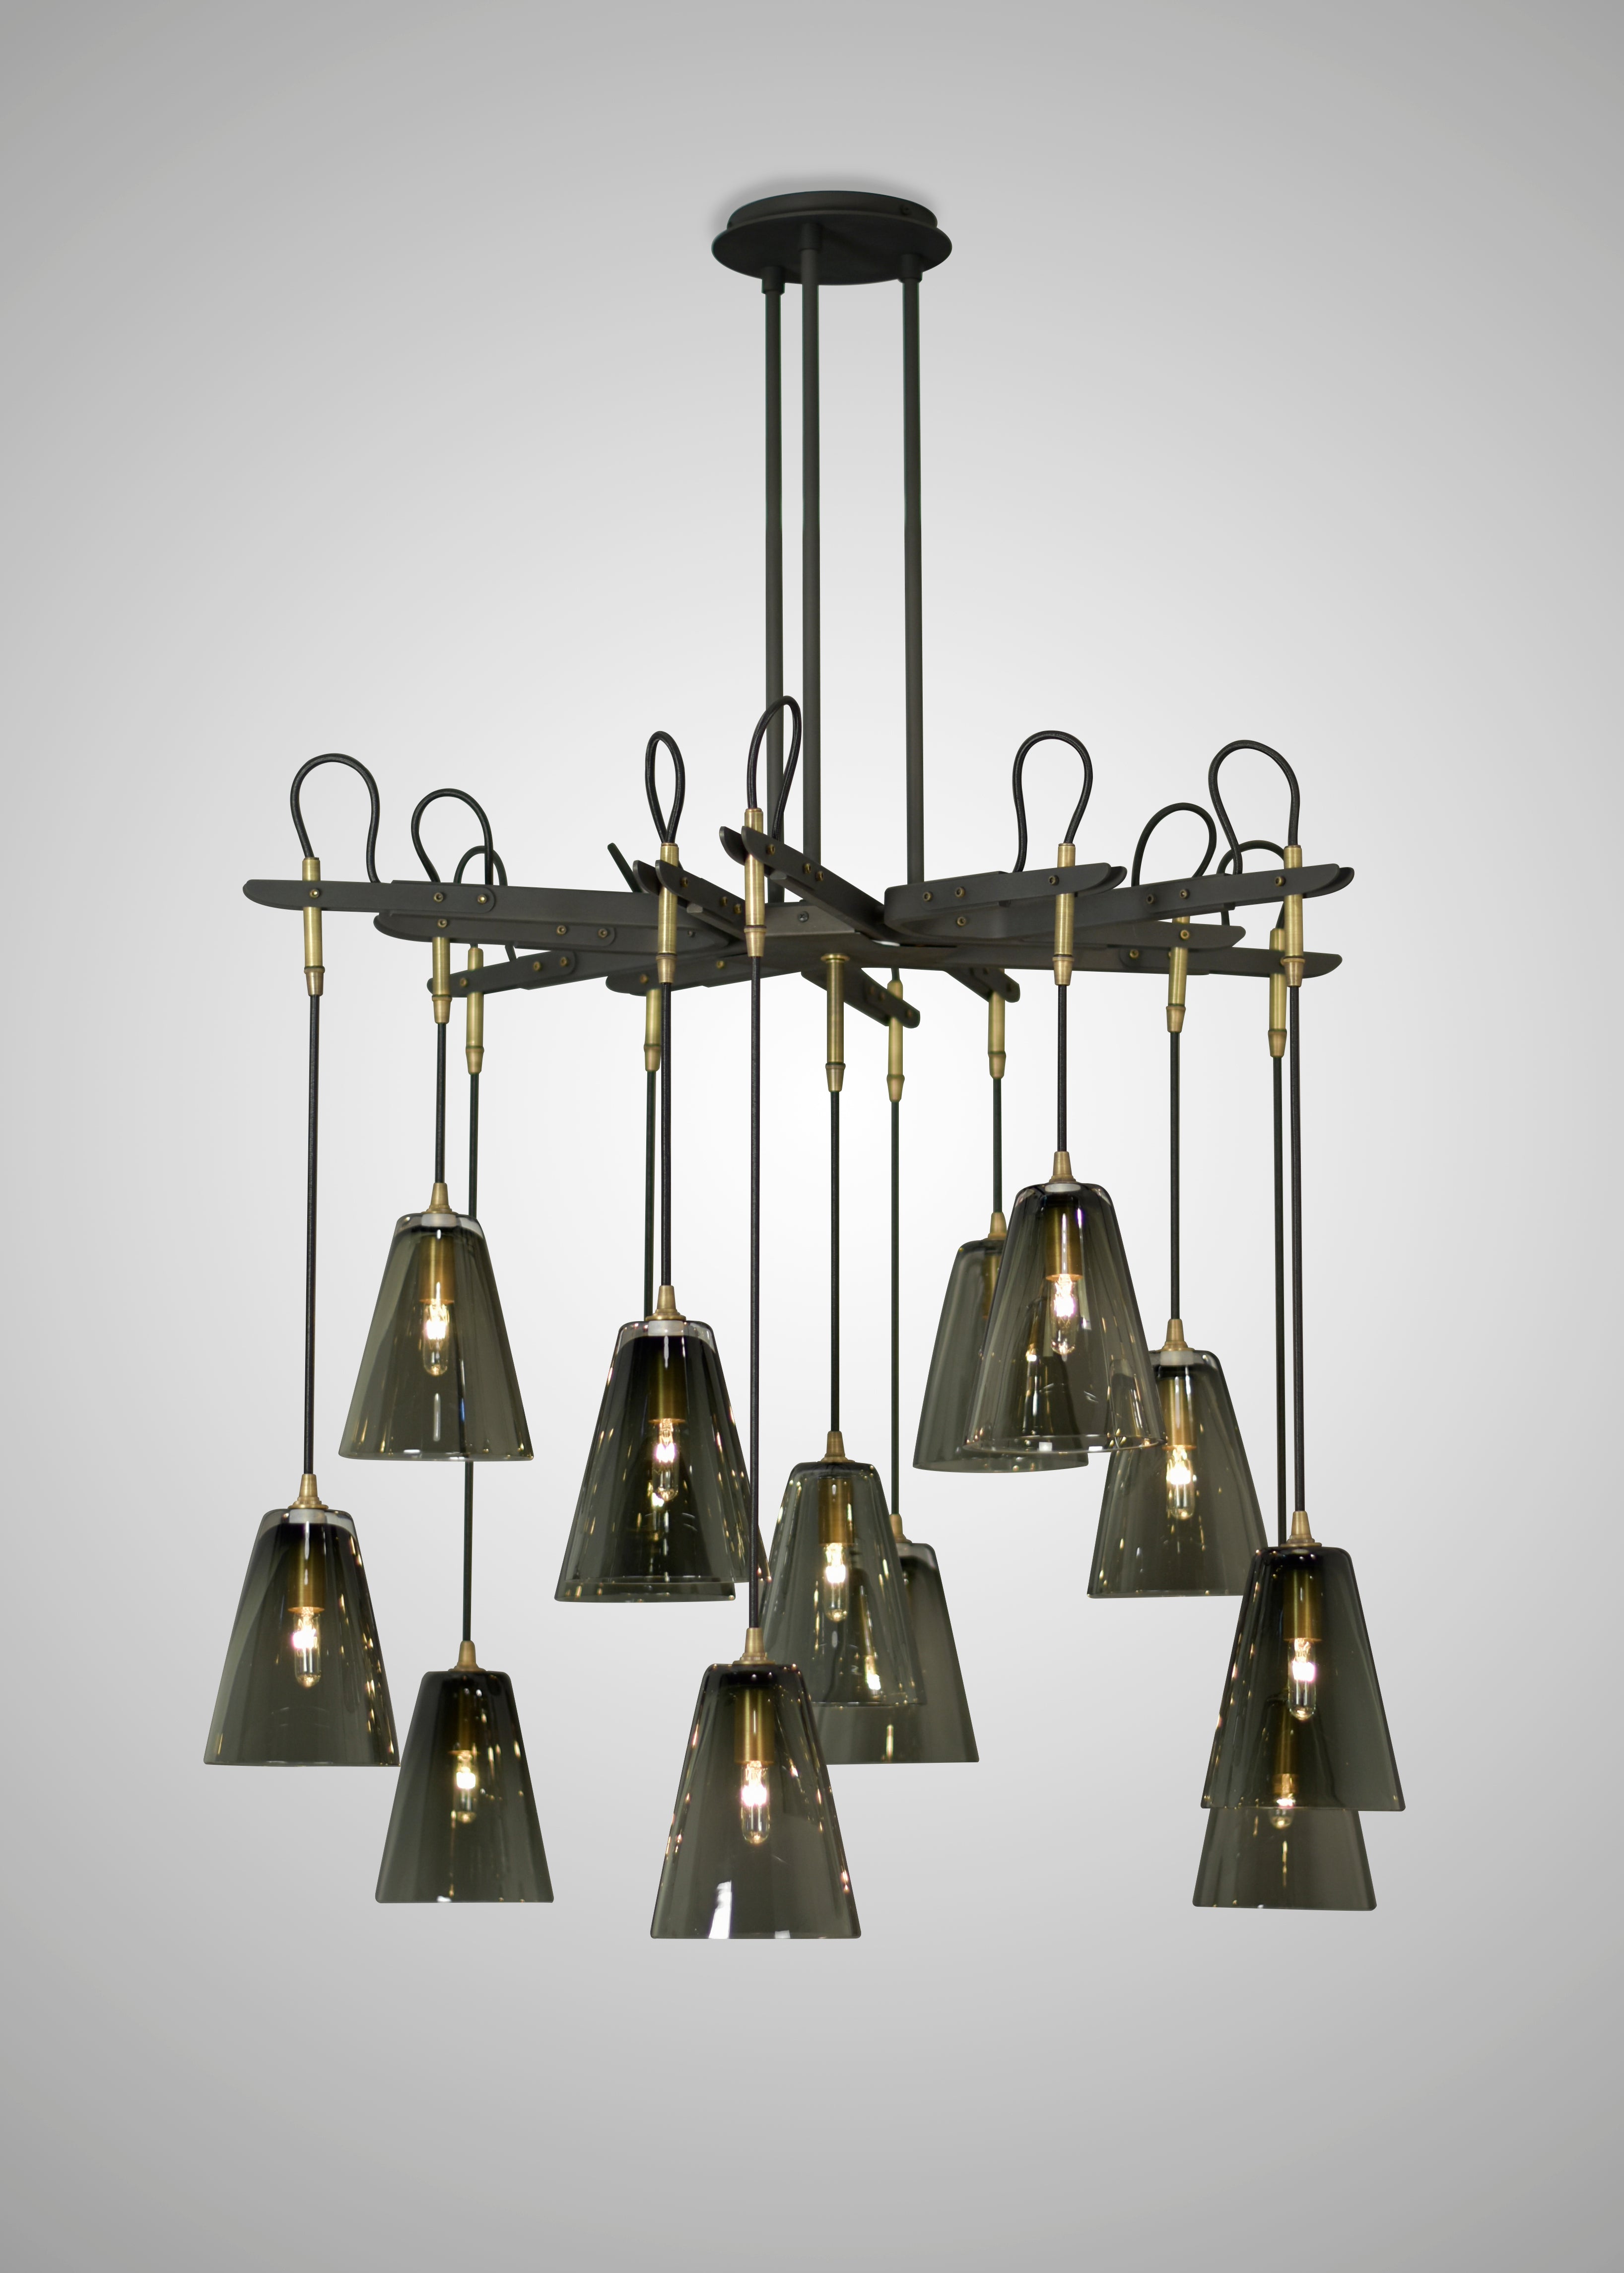 Patinated Steel with Light Antique Brass accents and Smoke/Smooth Glass Shade